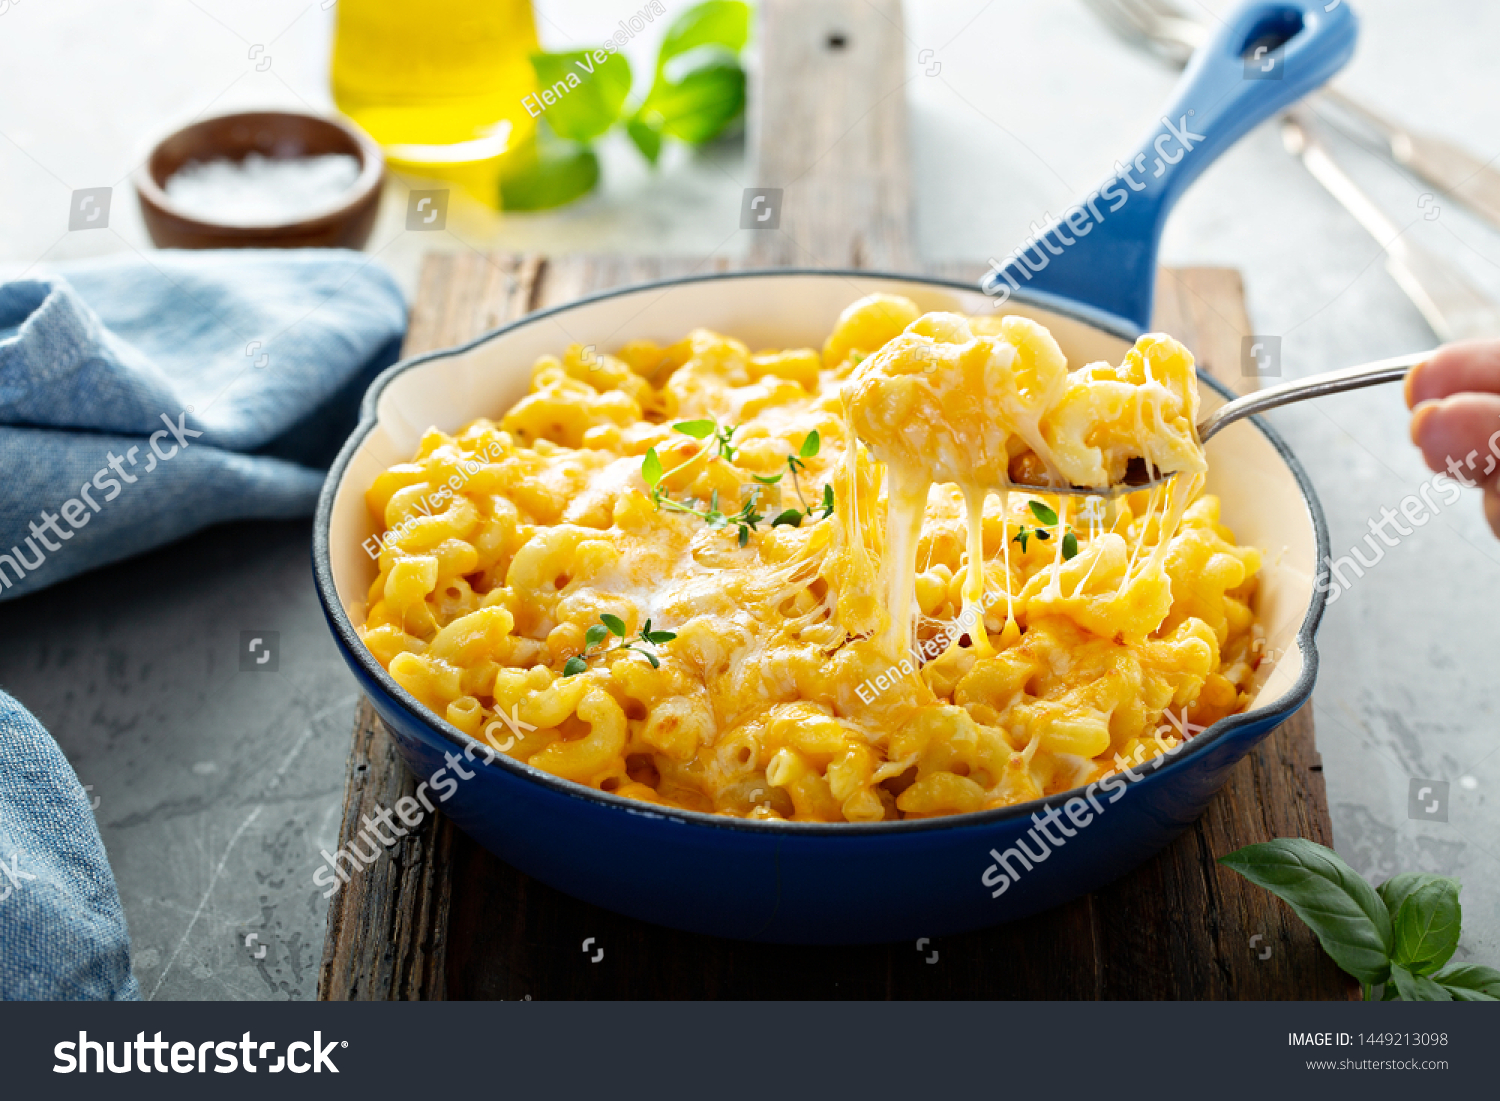 Baked mac and cheese in a cast iron pan #1449213098